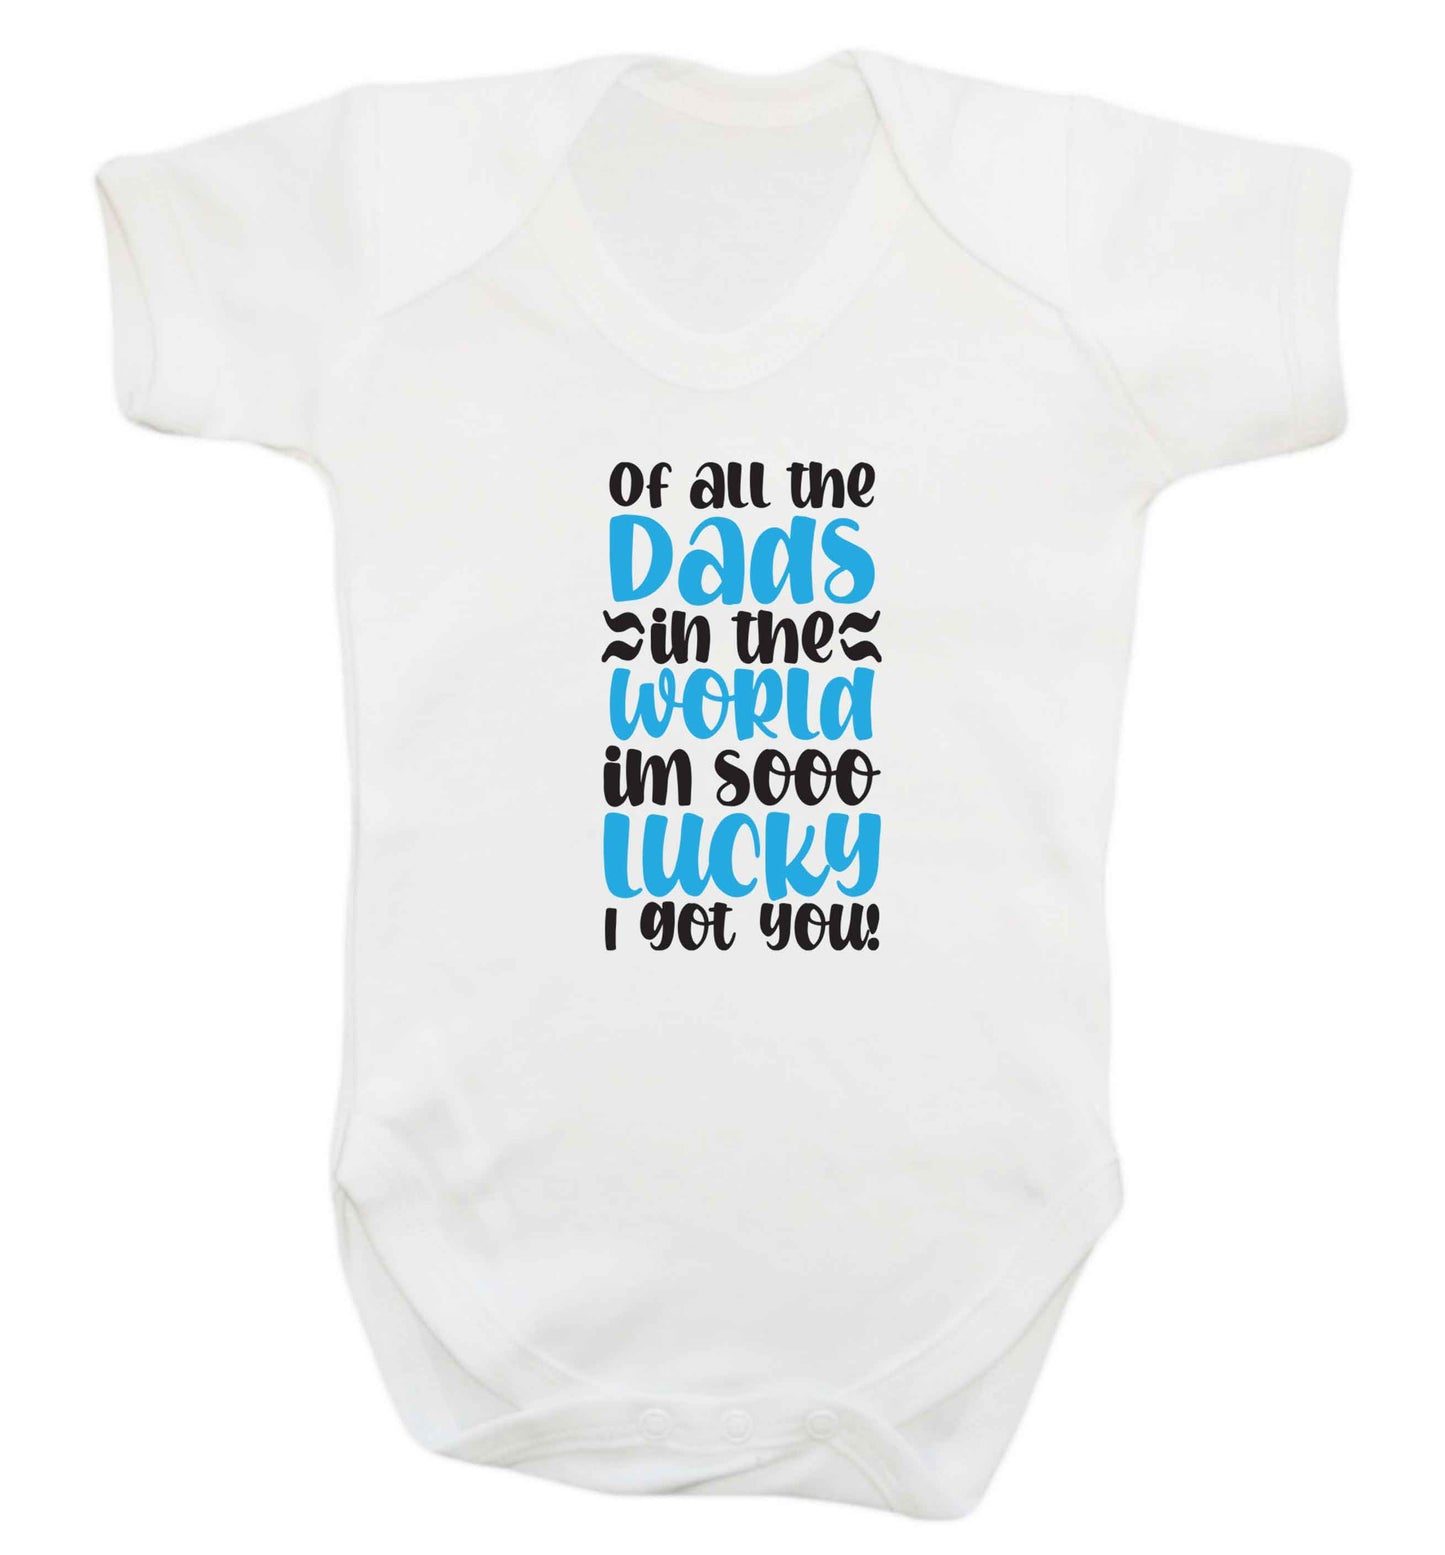 I'm as lucky as can be the worlds greatest dad belongs to me! baby vest white 18-24 months